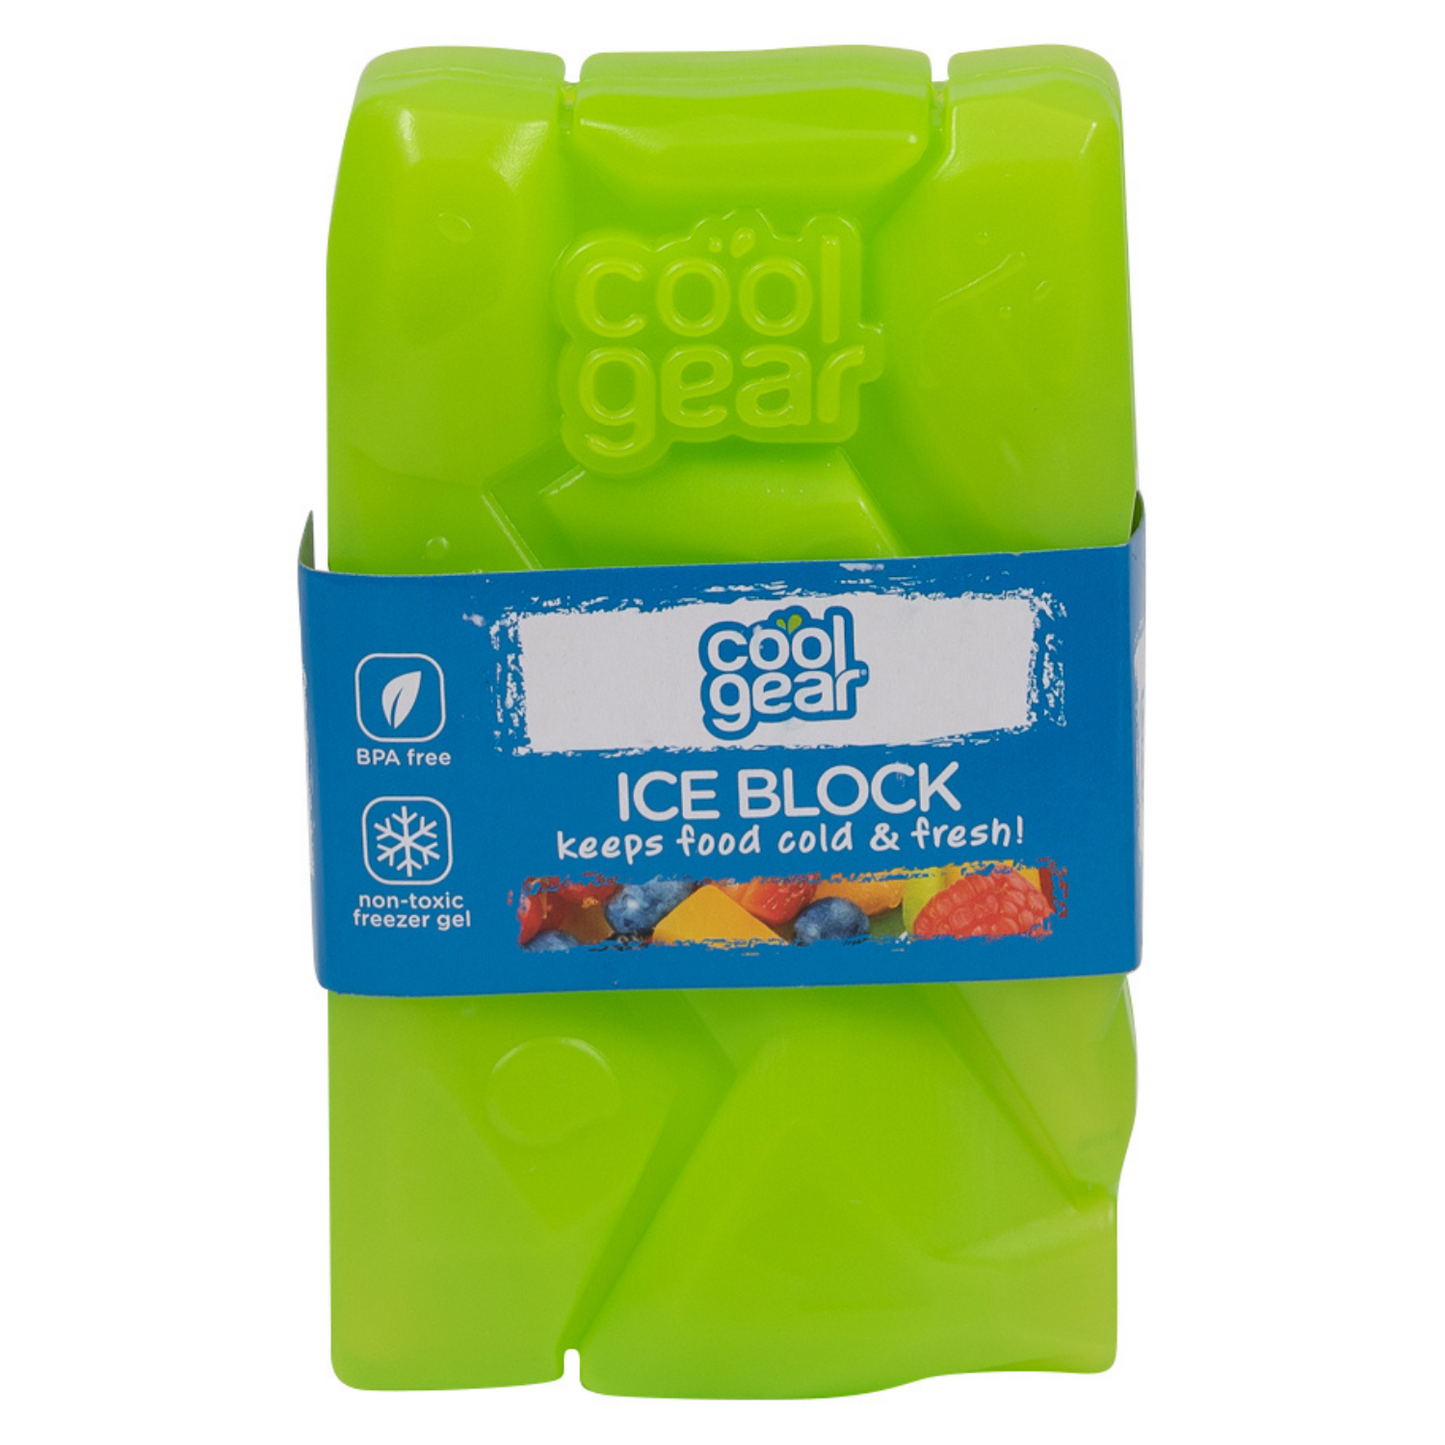 Fatboy Cooler Ice Pack